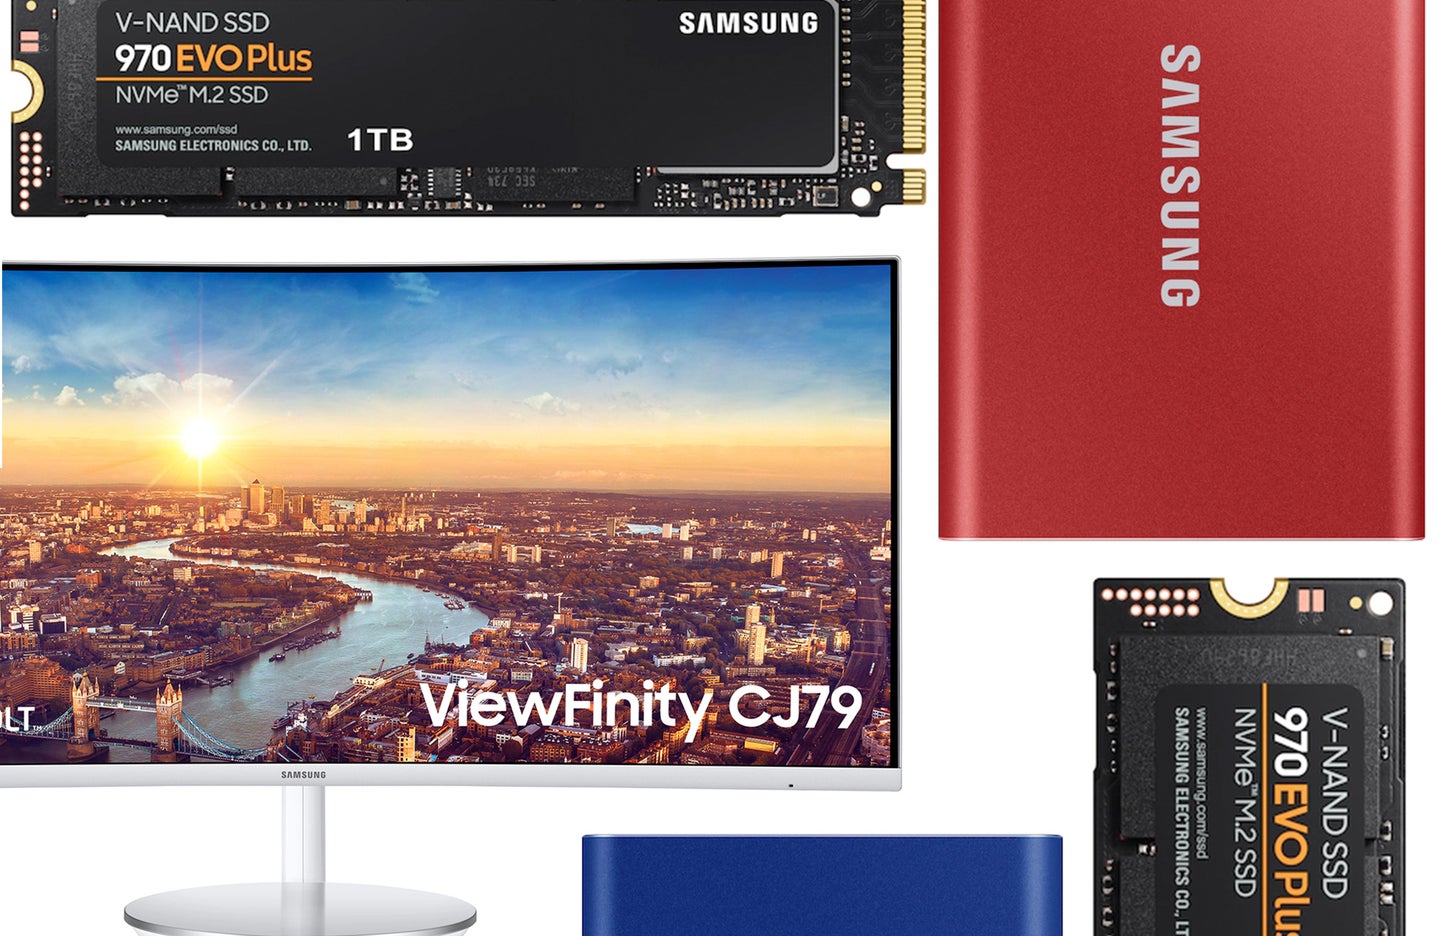 Samsung back to school deals on monitors and SSDs